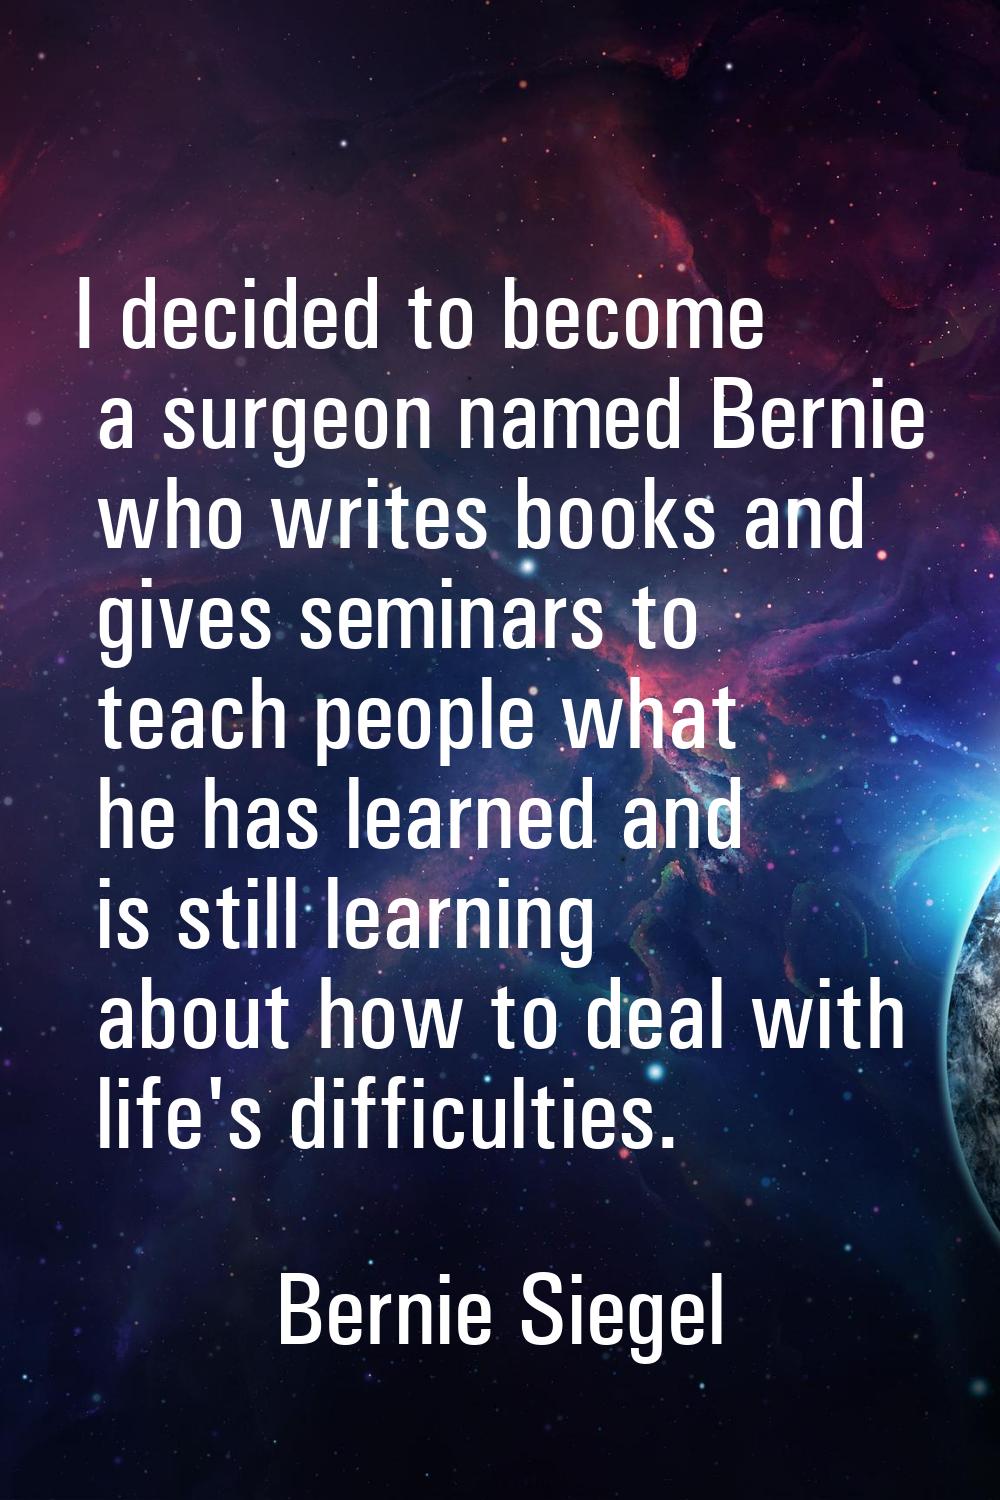 I decided to become a surgeon named Bernie who writes books and gives seminars to teach people what